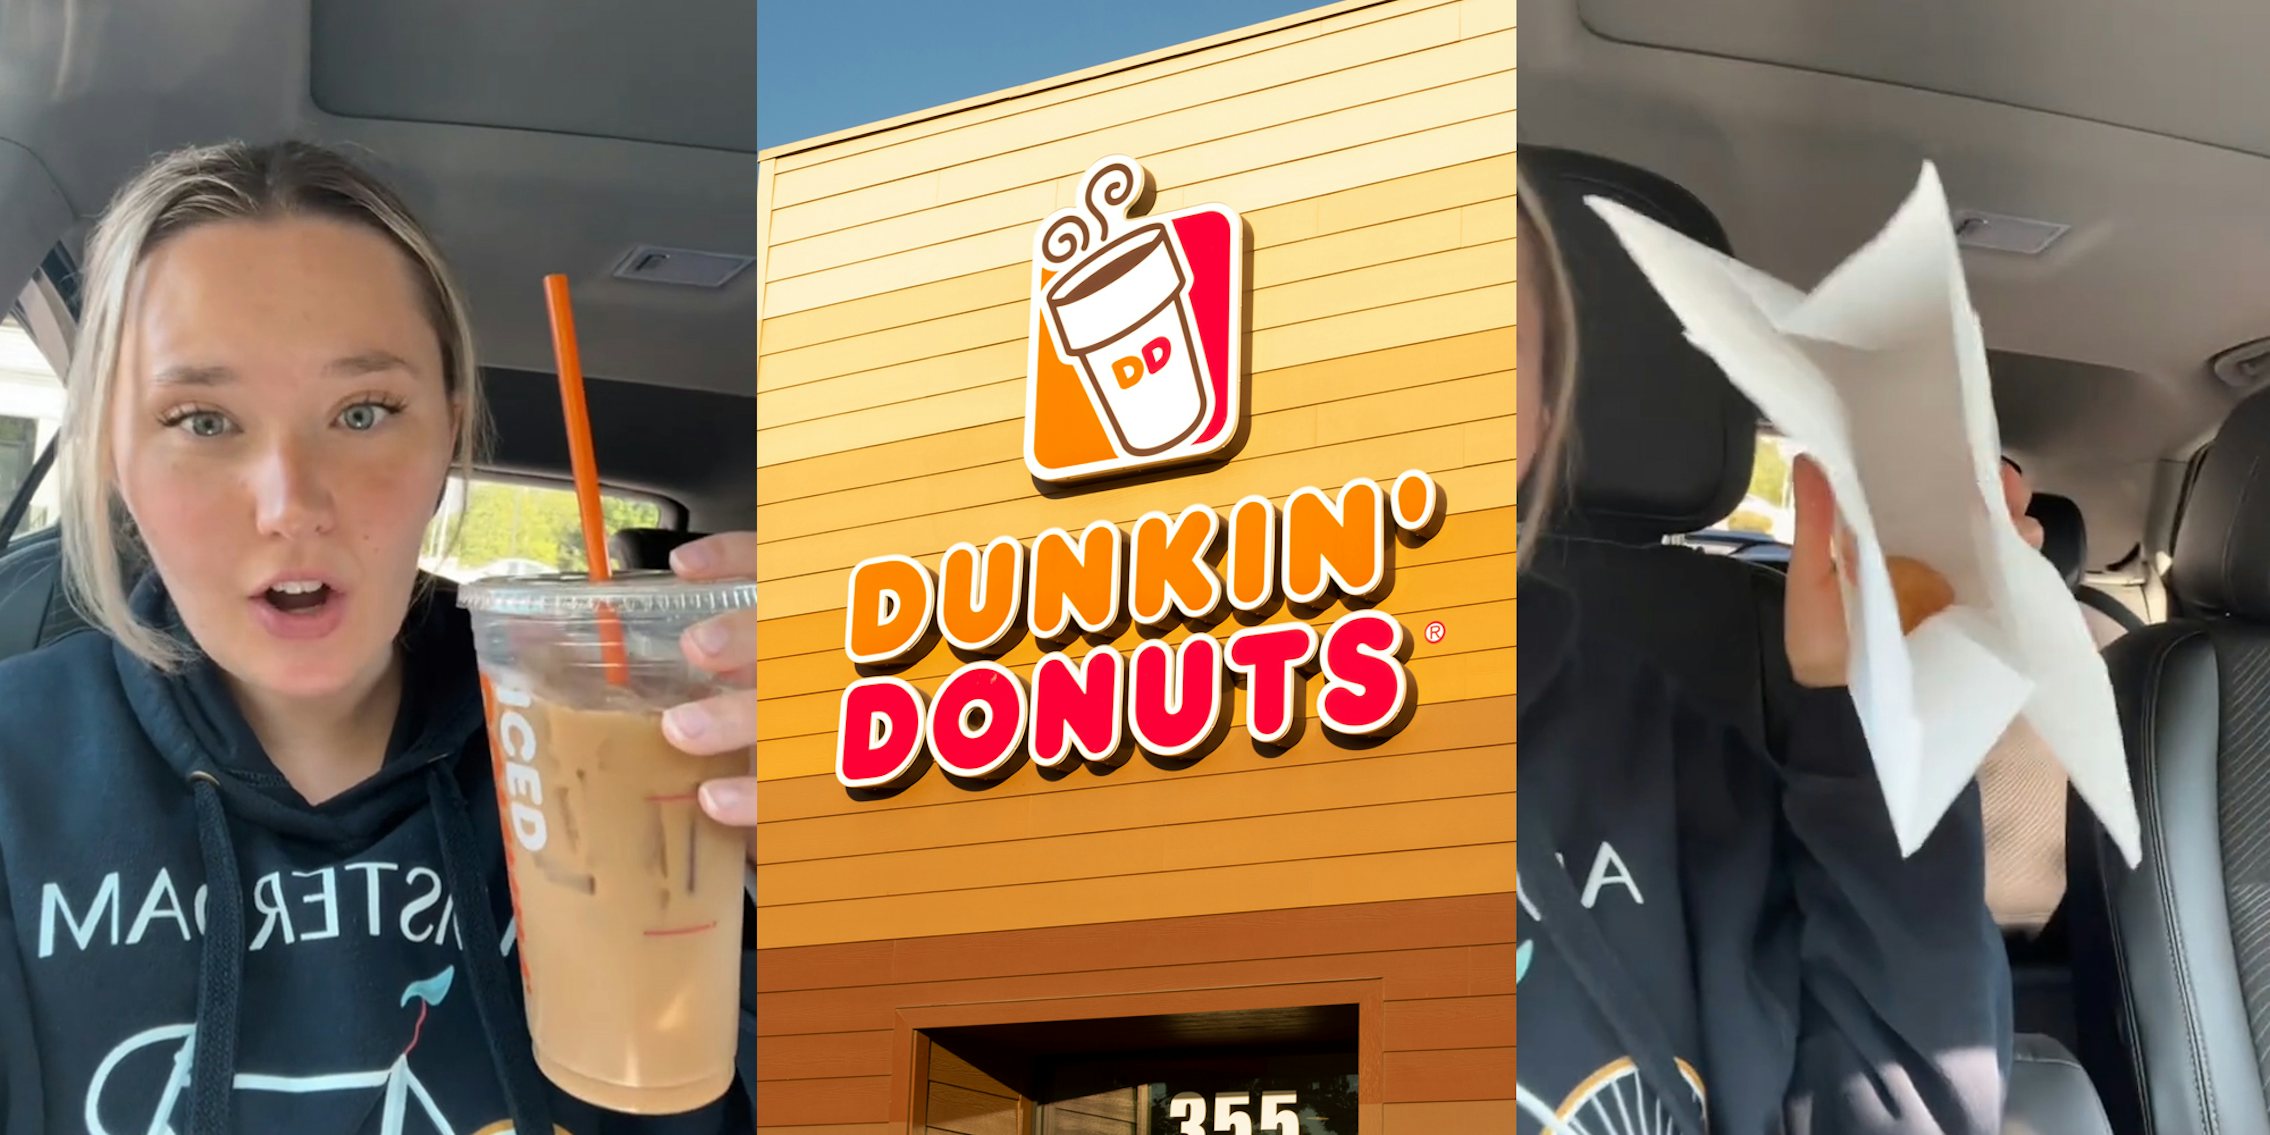 Dunkin' customer speaking in car holding coffee (l) Dunkin' Donuts building with sign (c) Dunkin' customer speaking in car holding single munchkin in bag (r)